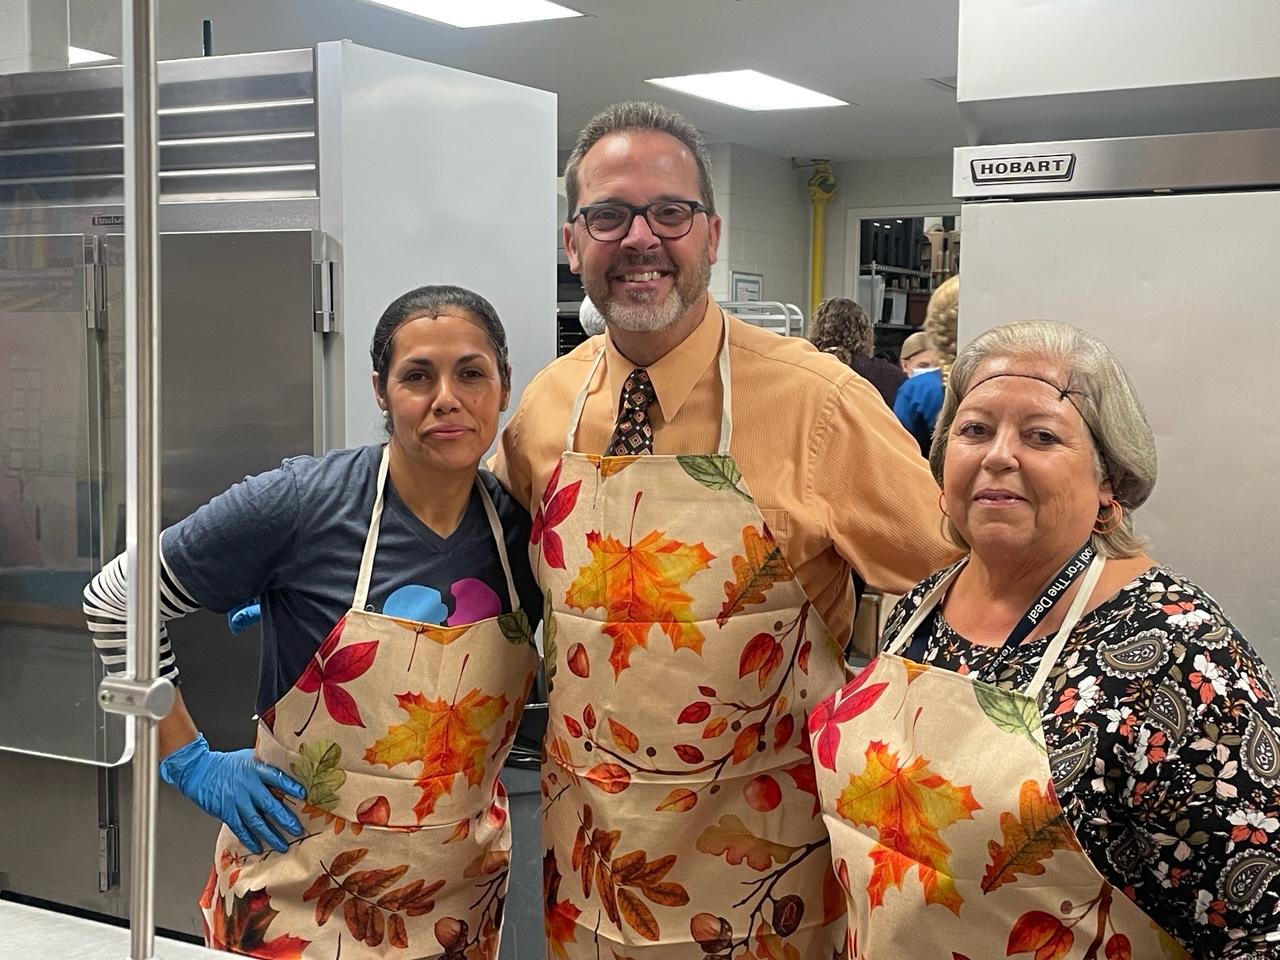 Peter Bailey posed with two cafeteria staff, all of them are wearing fall leaves aprons and smiling. 